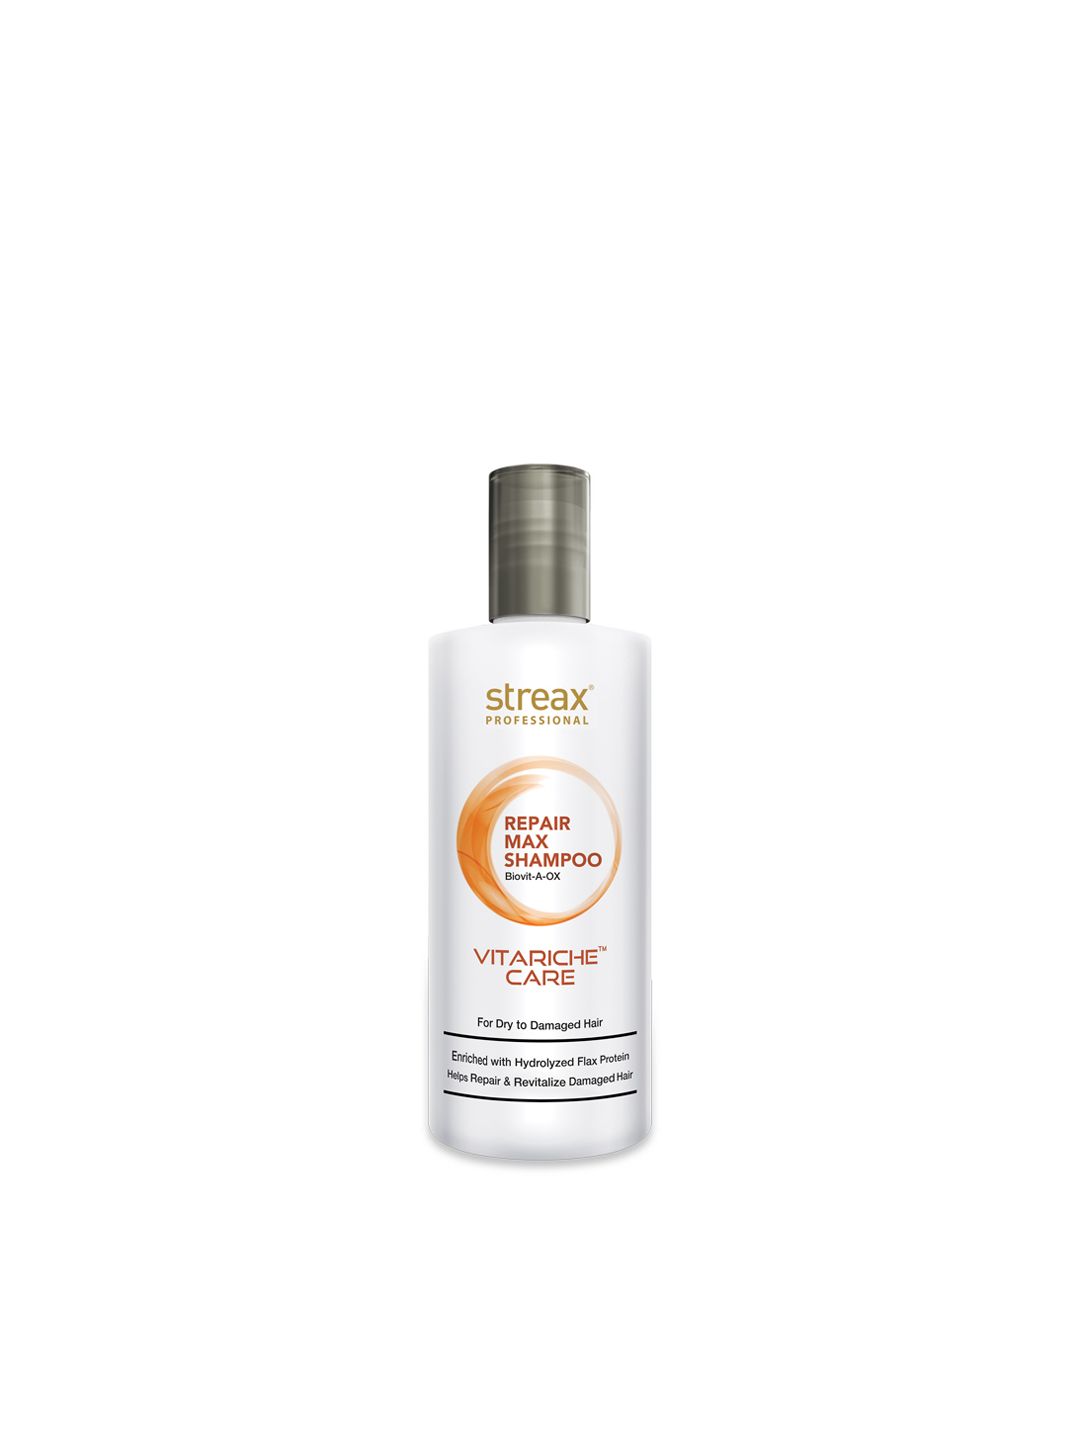 Streax Professional Vitariche Care Repair Max Shampoo for Dry to Damaged Hair - 300 ml Price in India